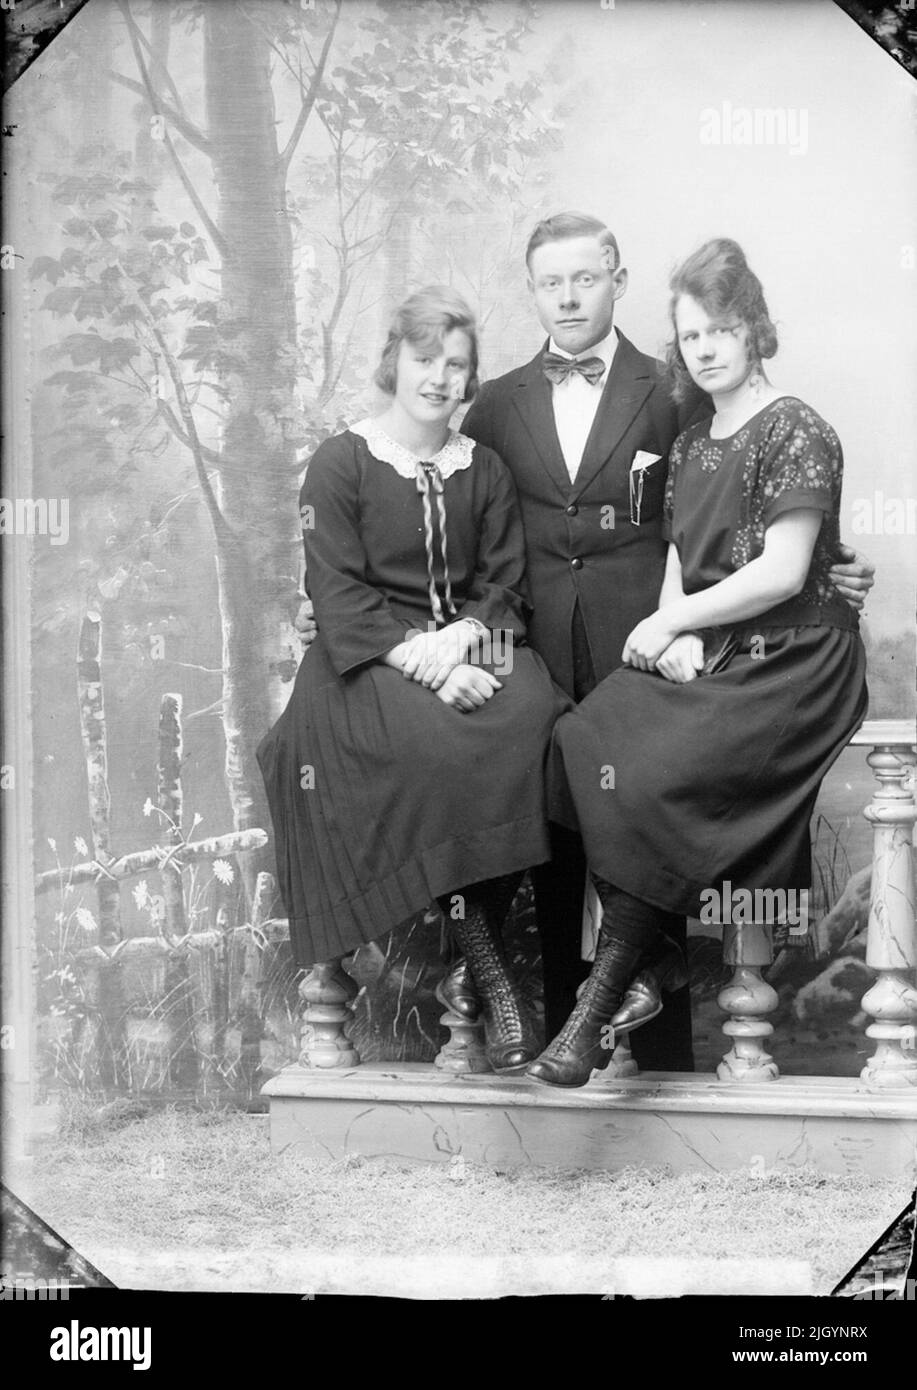 Two women and one man, Östhammar, Uppland. Historical event, name related to Objek: Andersson, Emilia Stock Photo